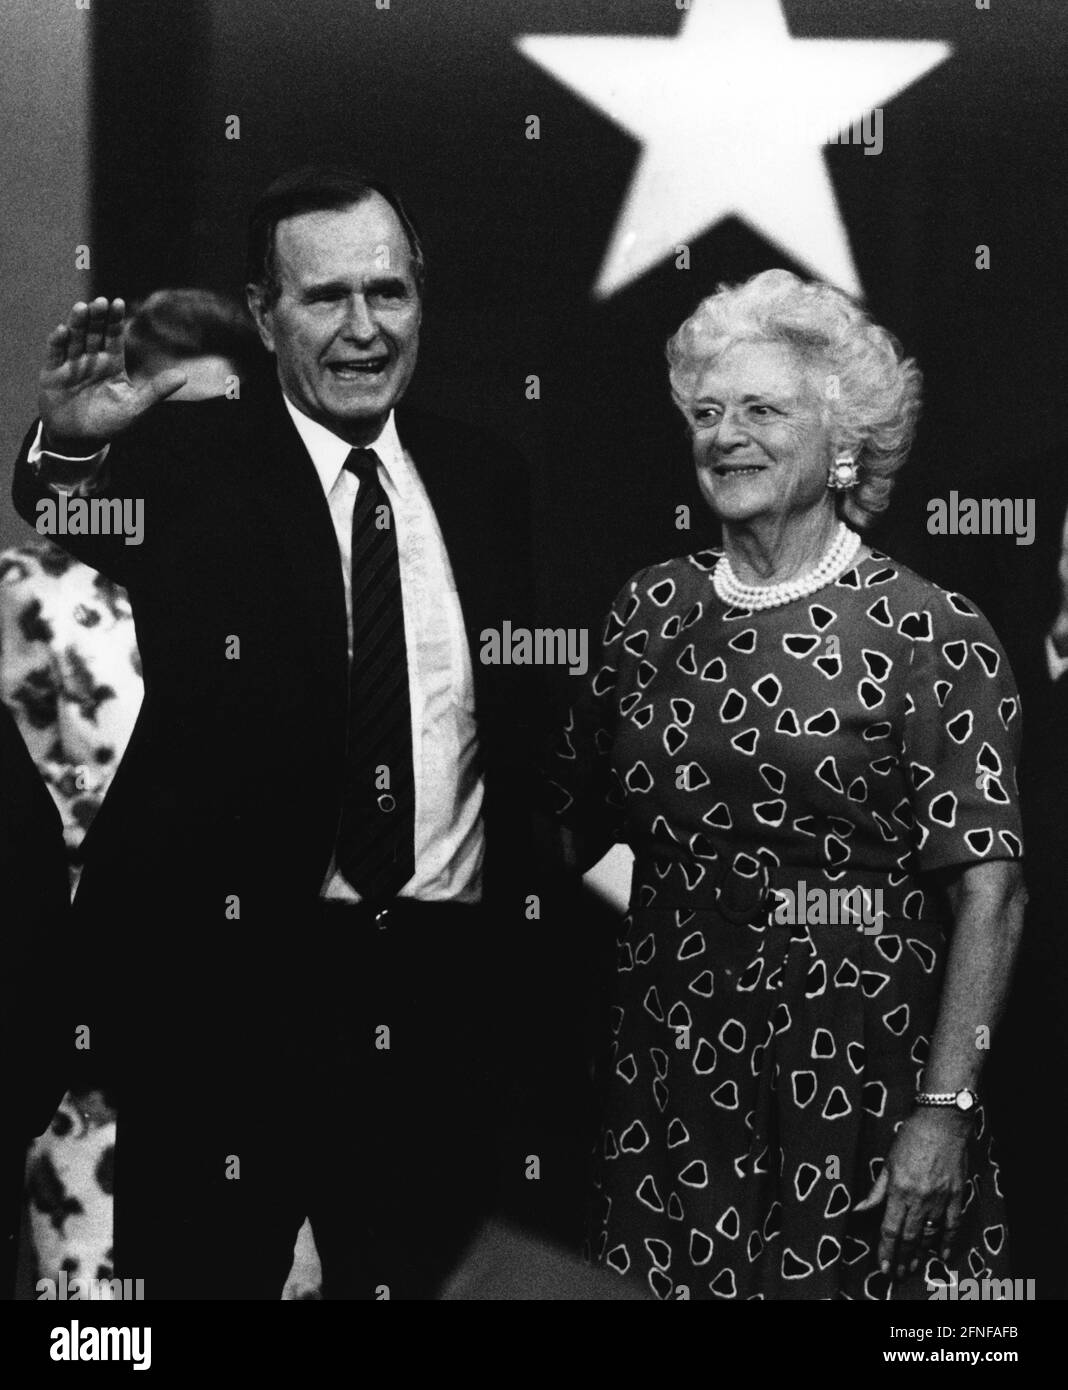 U.S. President George Herbert Walker Bush at a campaign appearance for the Republican Party convention at the Astrodome in Houston on Aug. 19. Standing next to him is his wife Barbara Bush. Bush lost the presidential election to Bill Clinton. [automated translation] Stock Photo